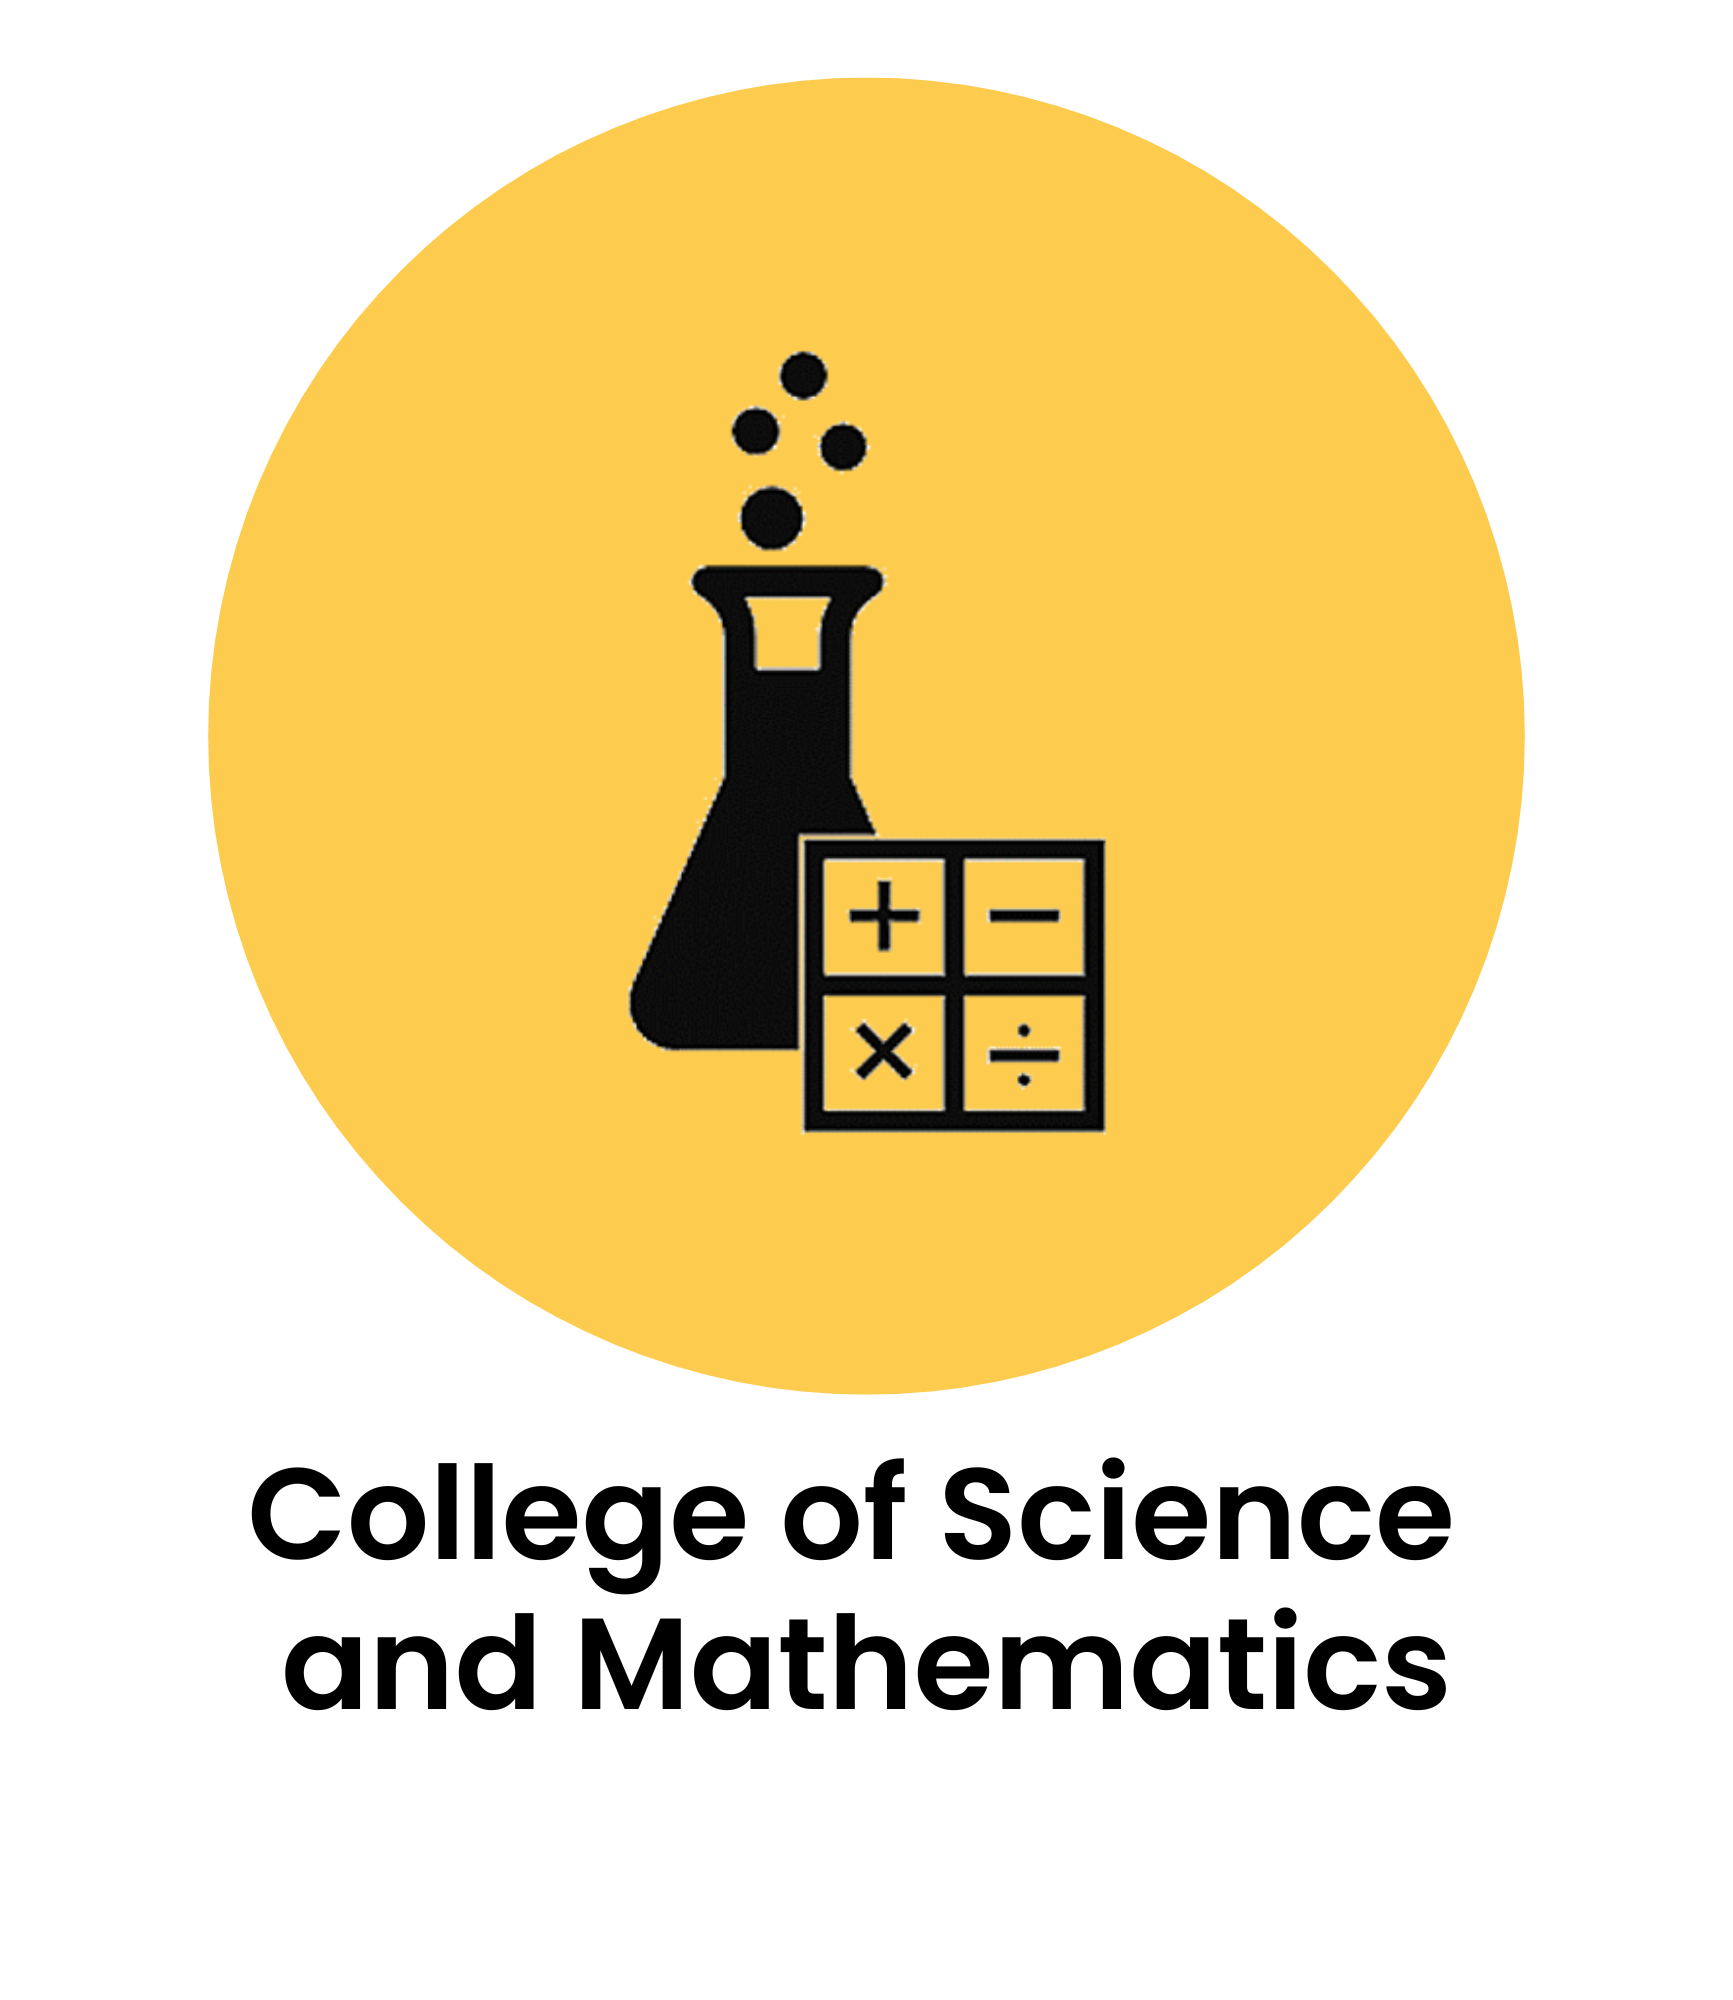 [text] College of Science and Mathematics